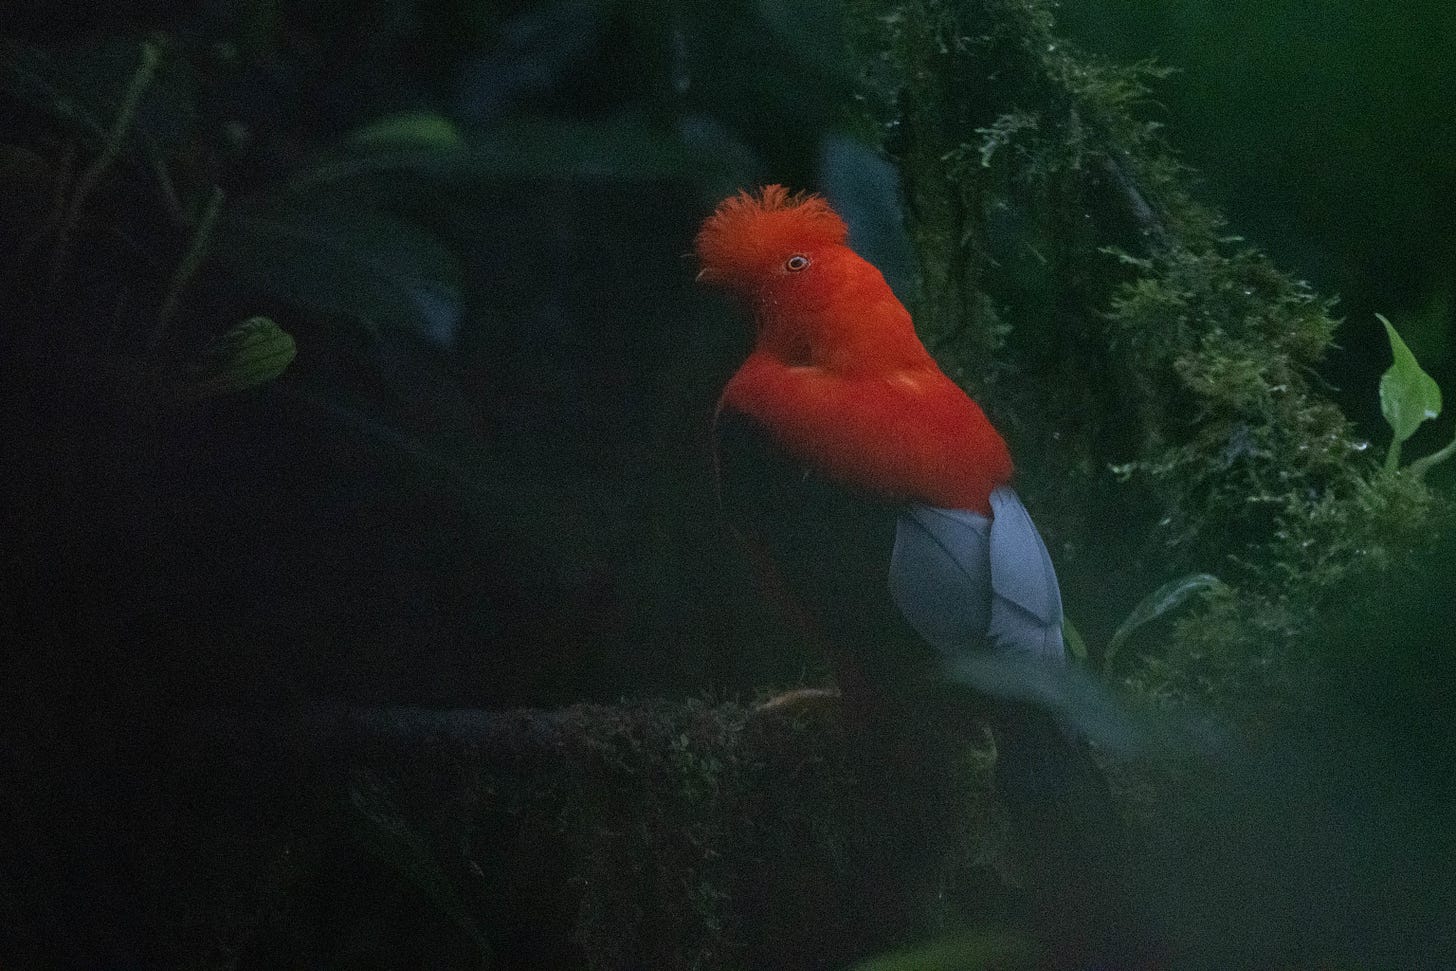 a fiery red-orange bird perched on a mossy snag. it is in the right third of the image, looking left. it has a crest that goes from the forehead to its orange beak, and a bright yellow eye. it has wings that are black near the shoulder, and white at the edges. the image is hazy-green and grainy, taken in the dark and in the rain.